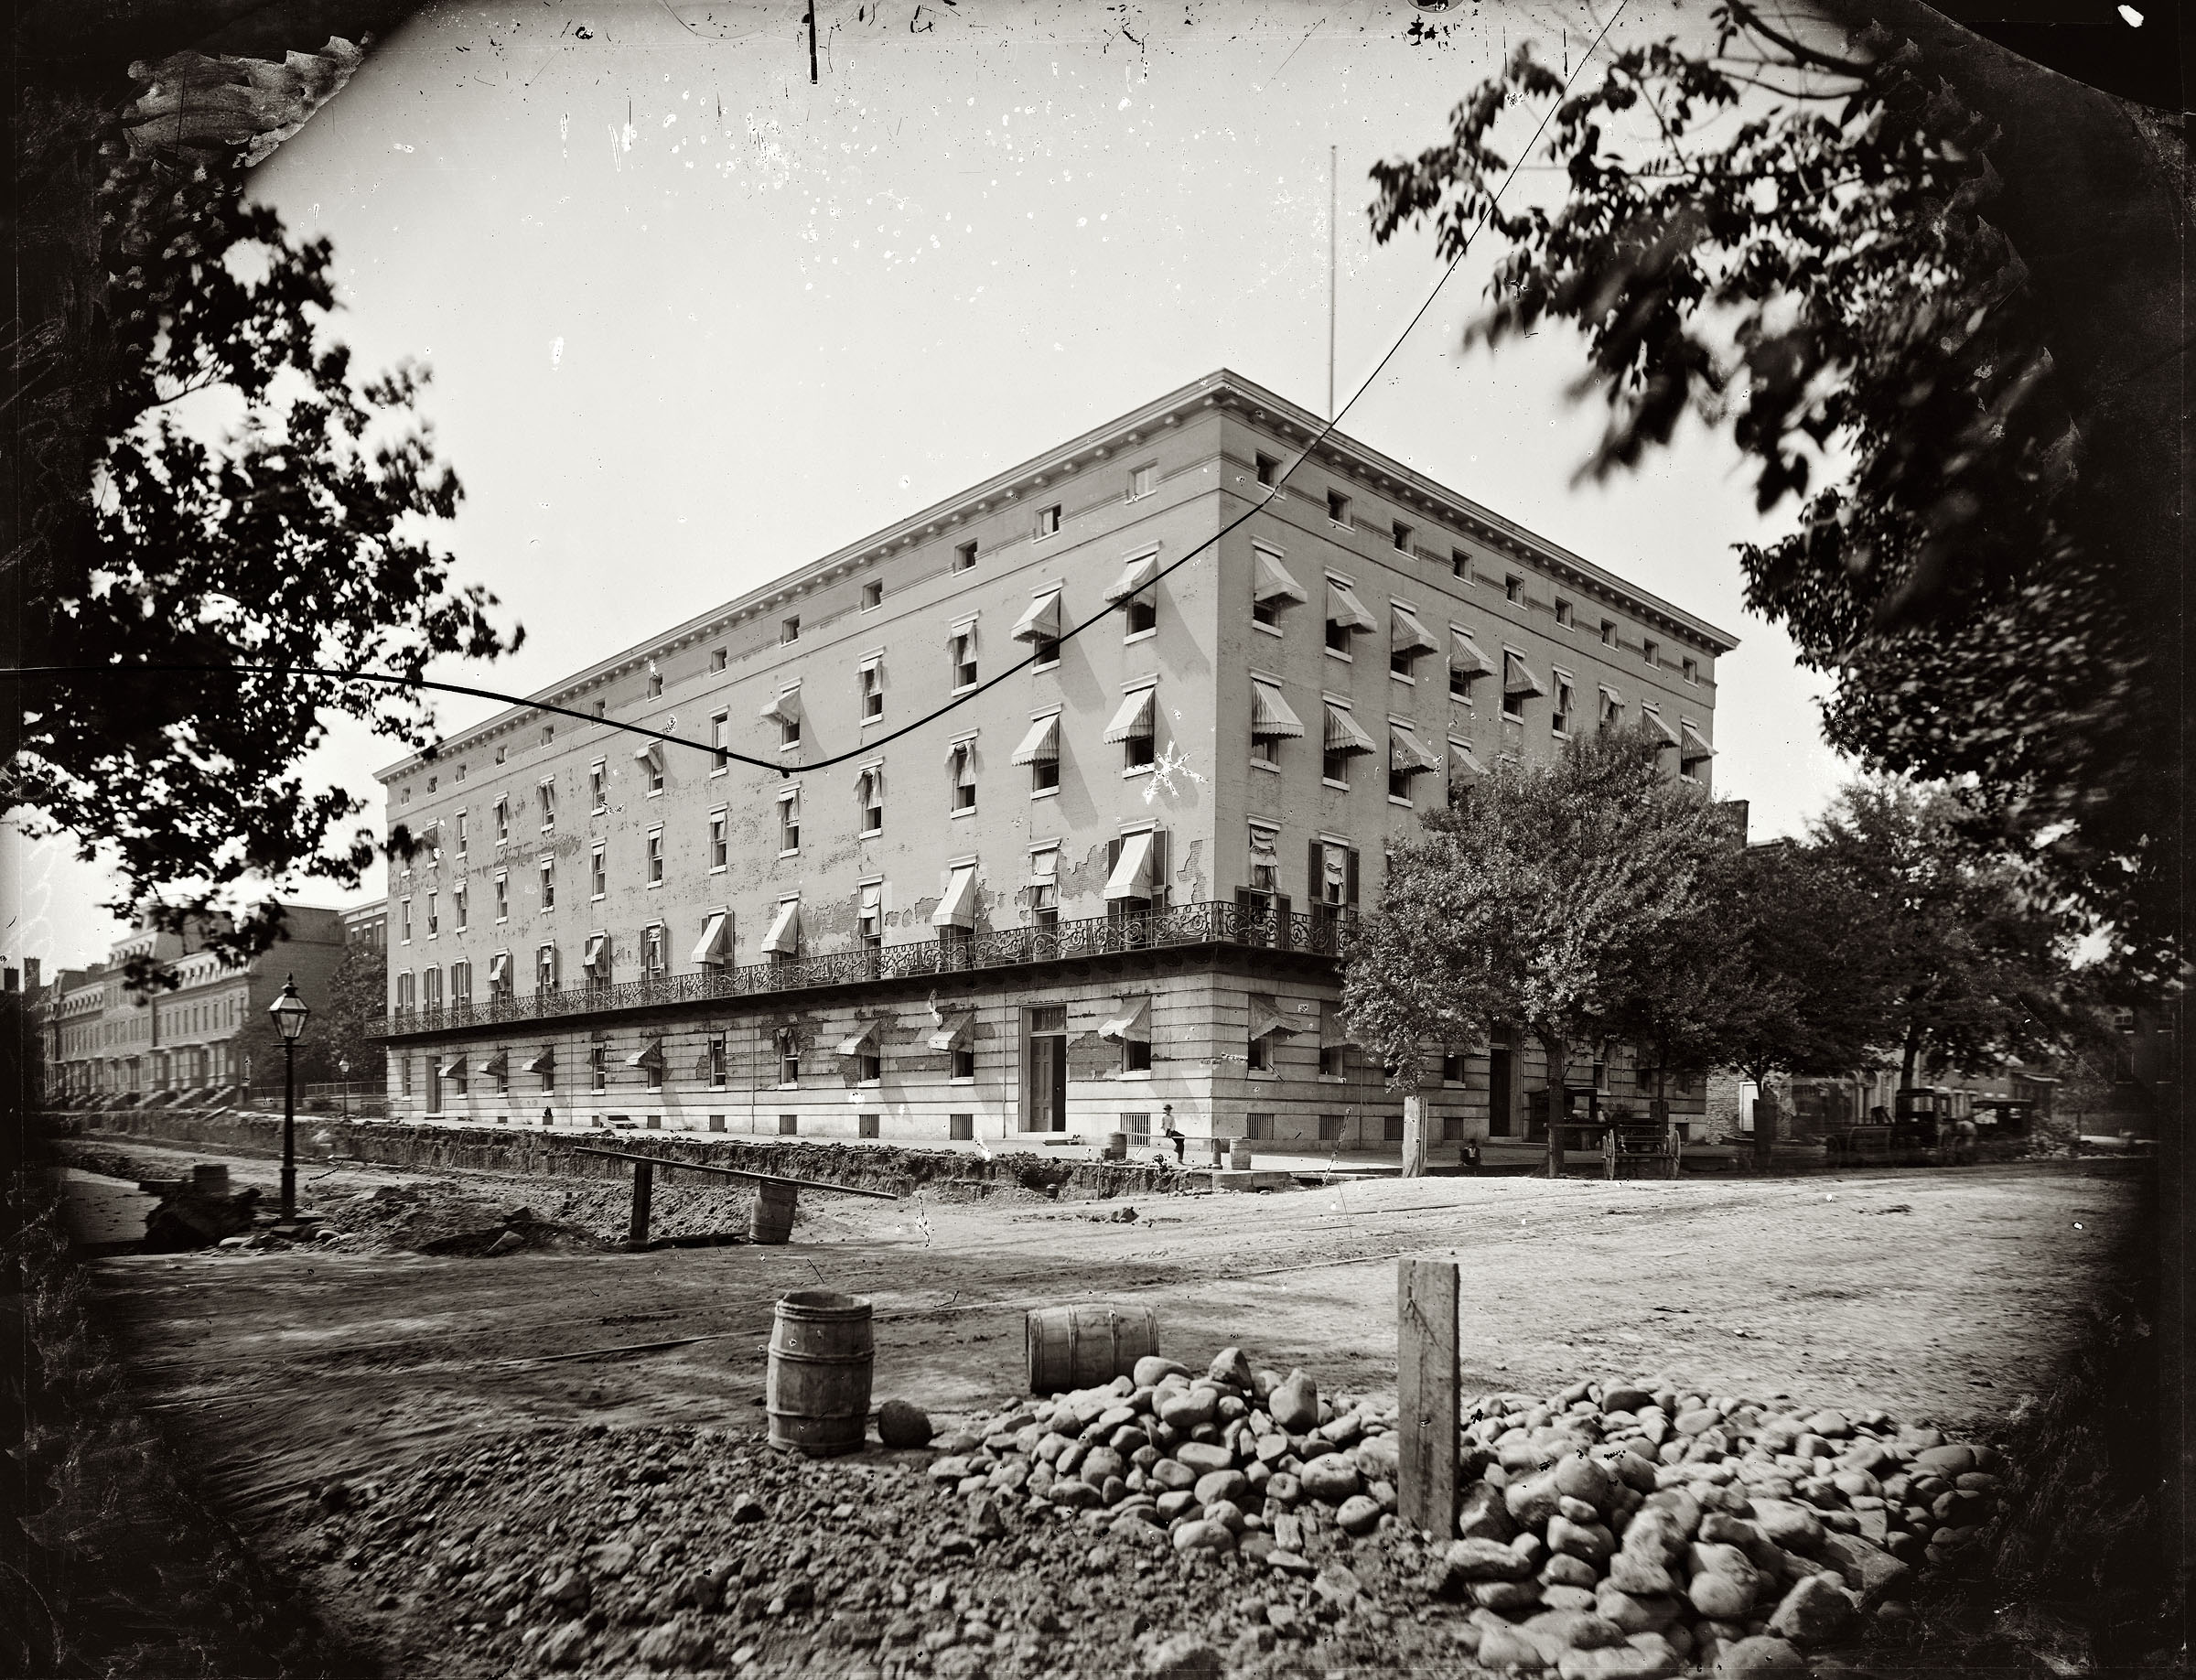 Washington, D.C., circa 1860s. "Old Winder Building, 17th & F. St. NW." Wet plate glass negative. Brady-Handy Collection, Library of Congress. View full size.